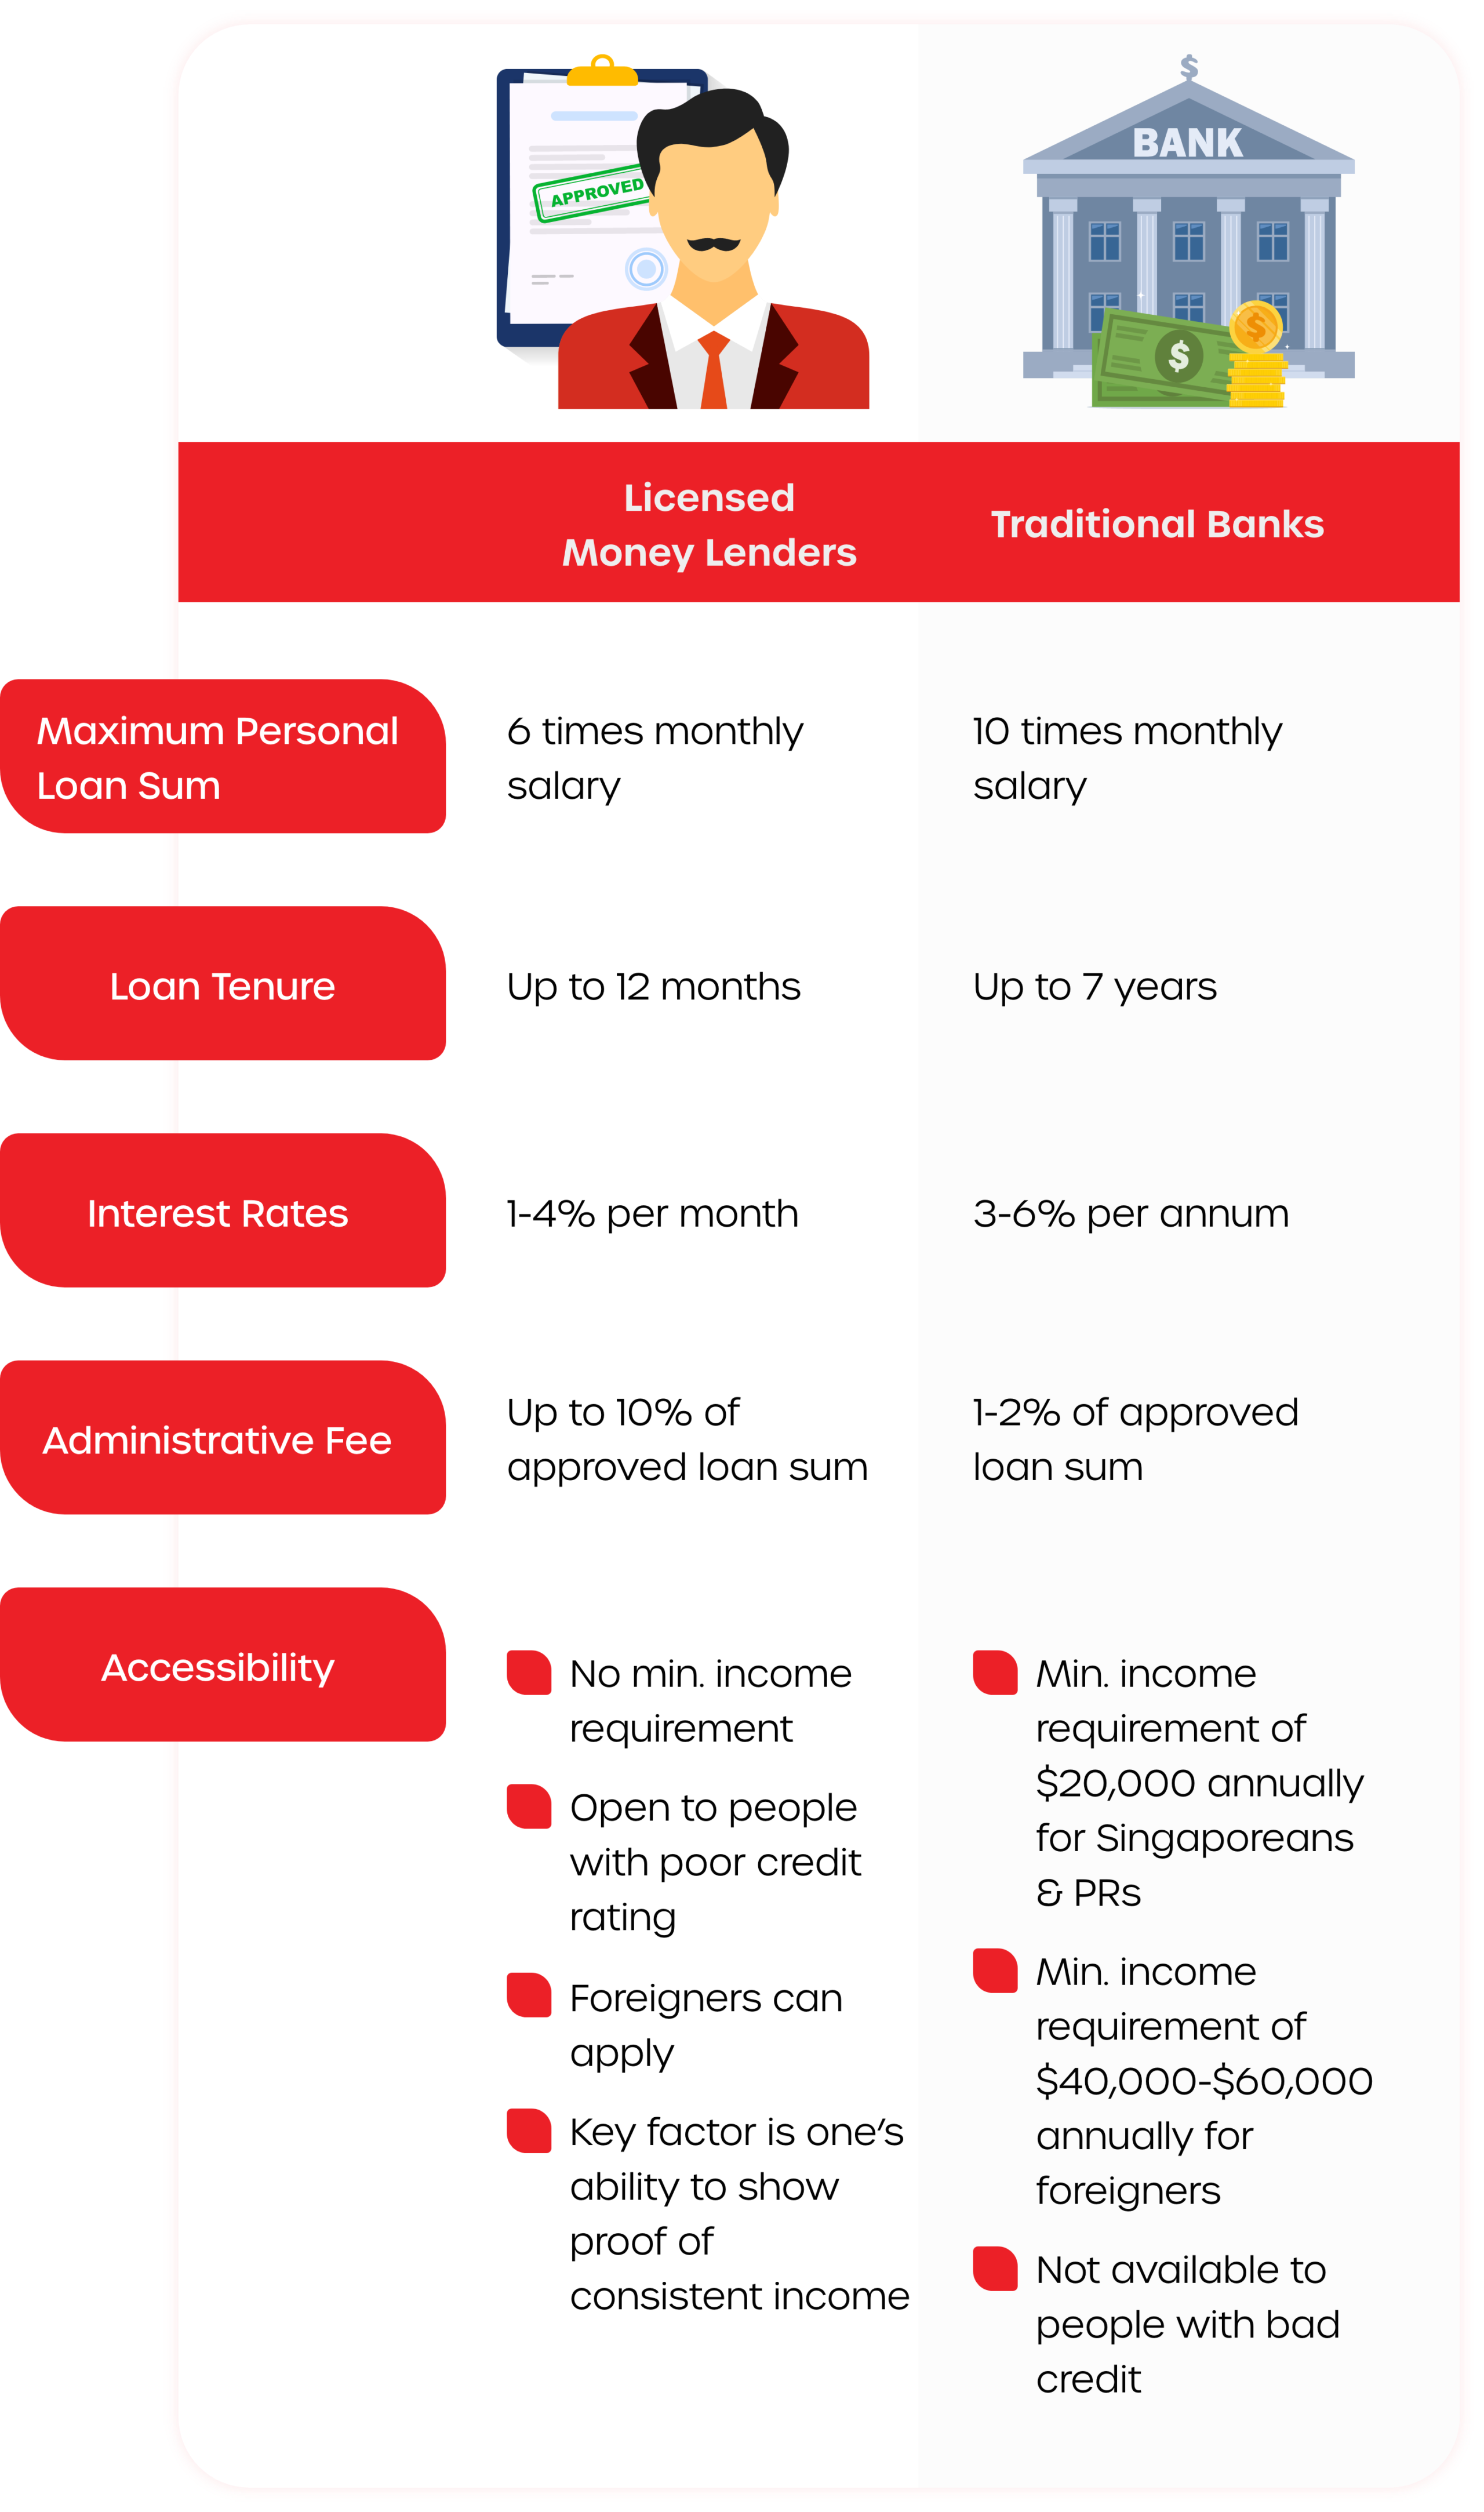 An infographic comparing the differences between borrowing from licensed money lenders and traditional banks